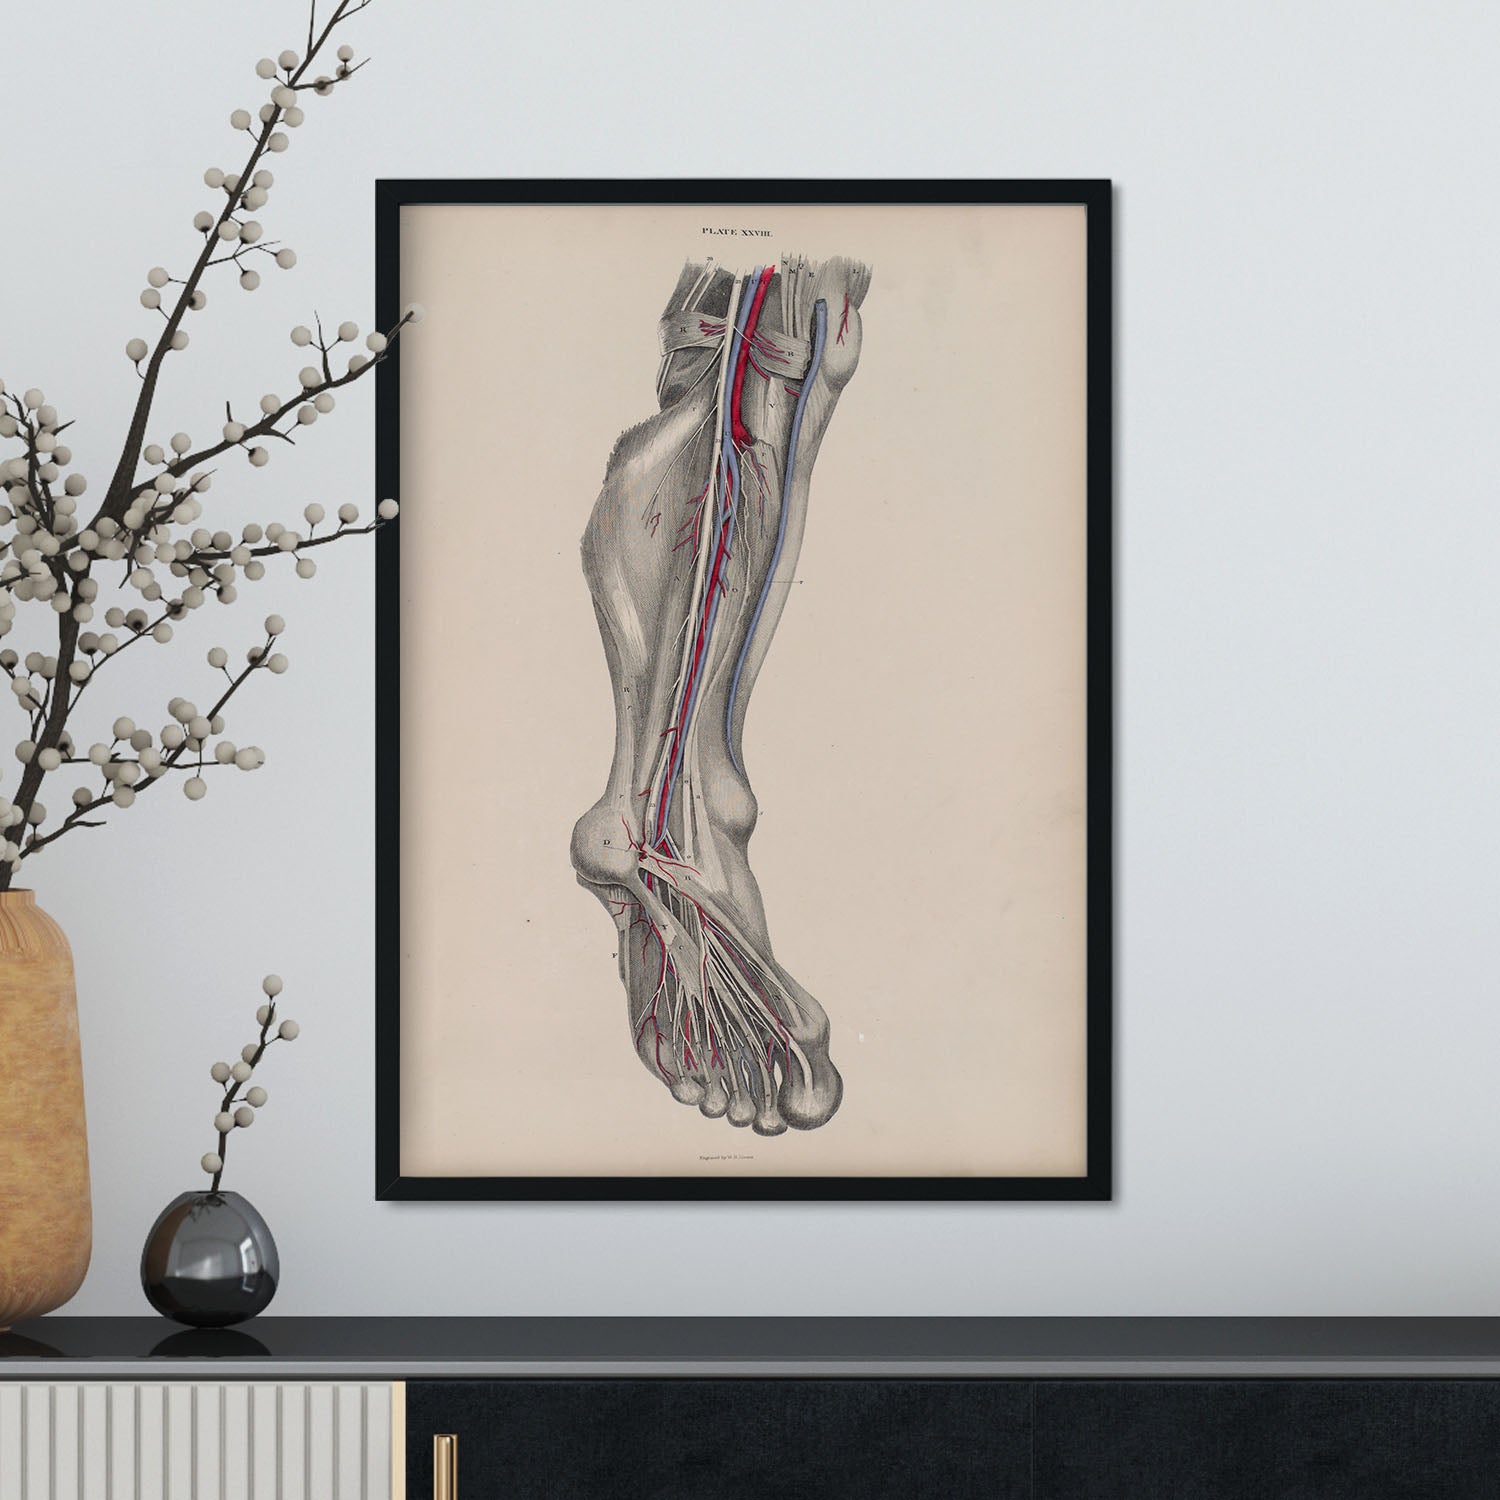 Dissection of the lower leg and foot-Artwork-Nacnic-Nacnic Estudio SL